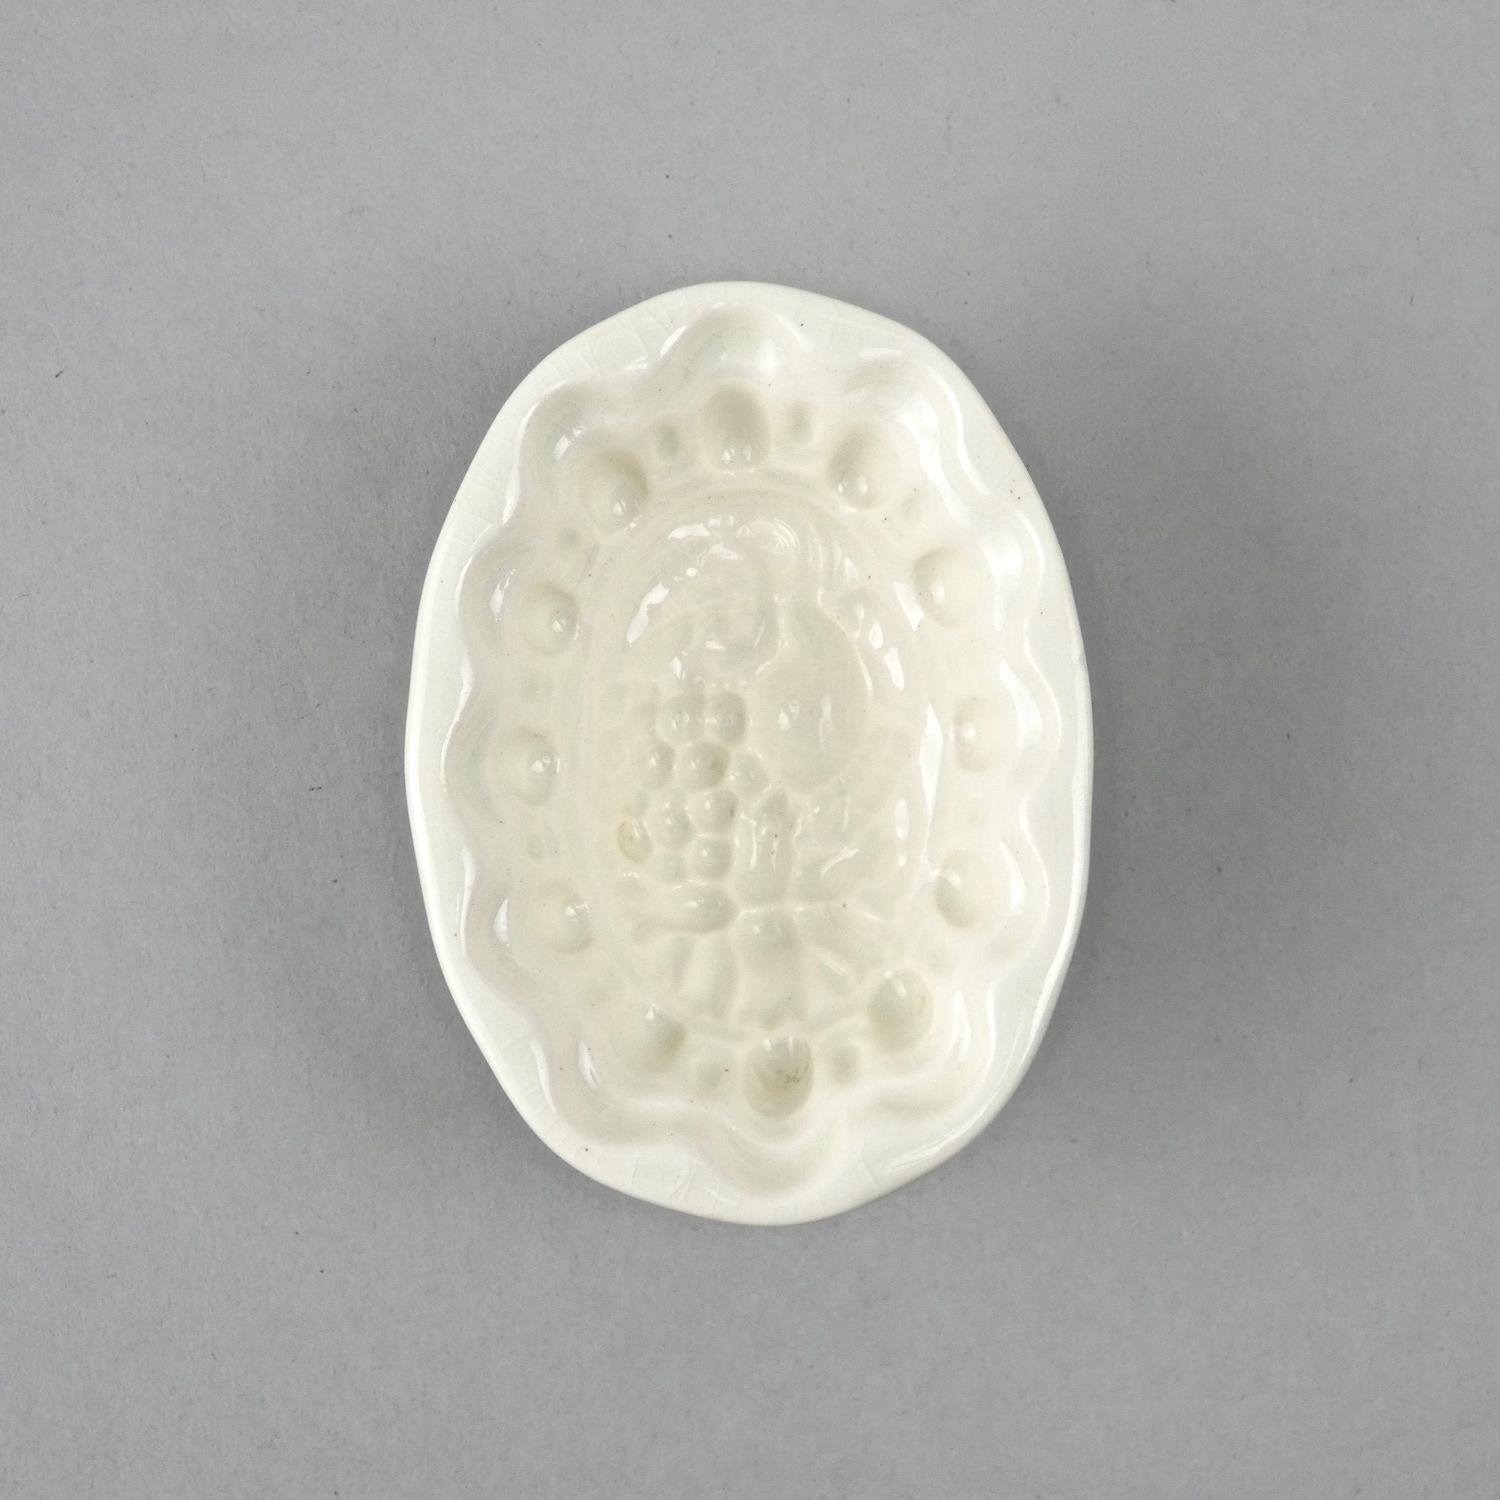 Small mould with grapes